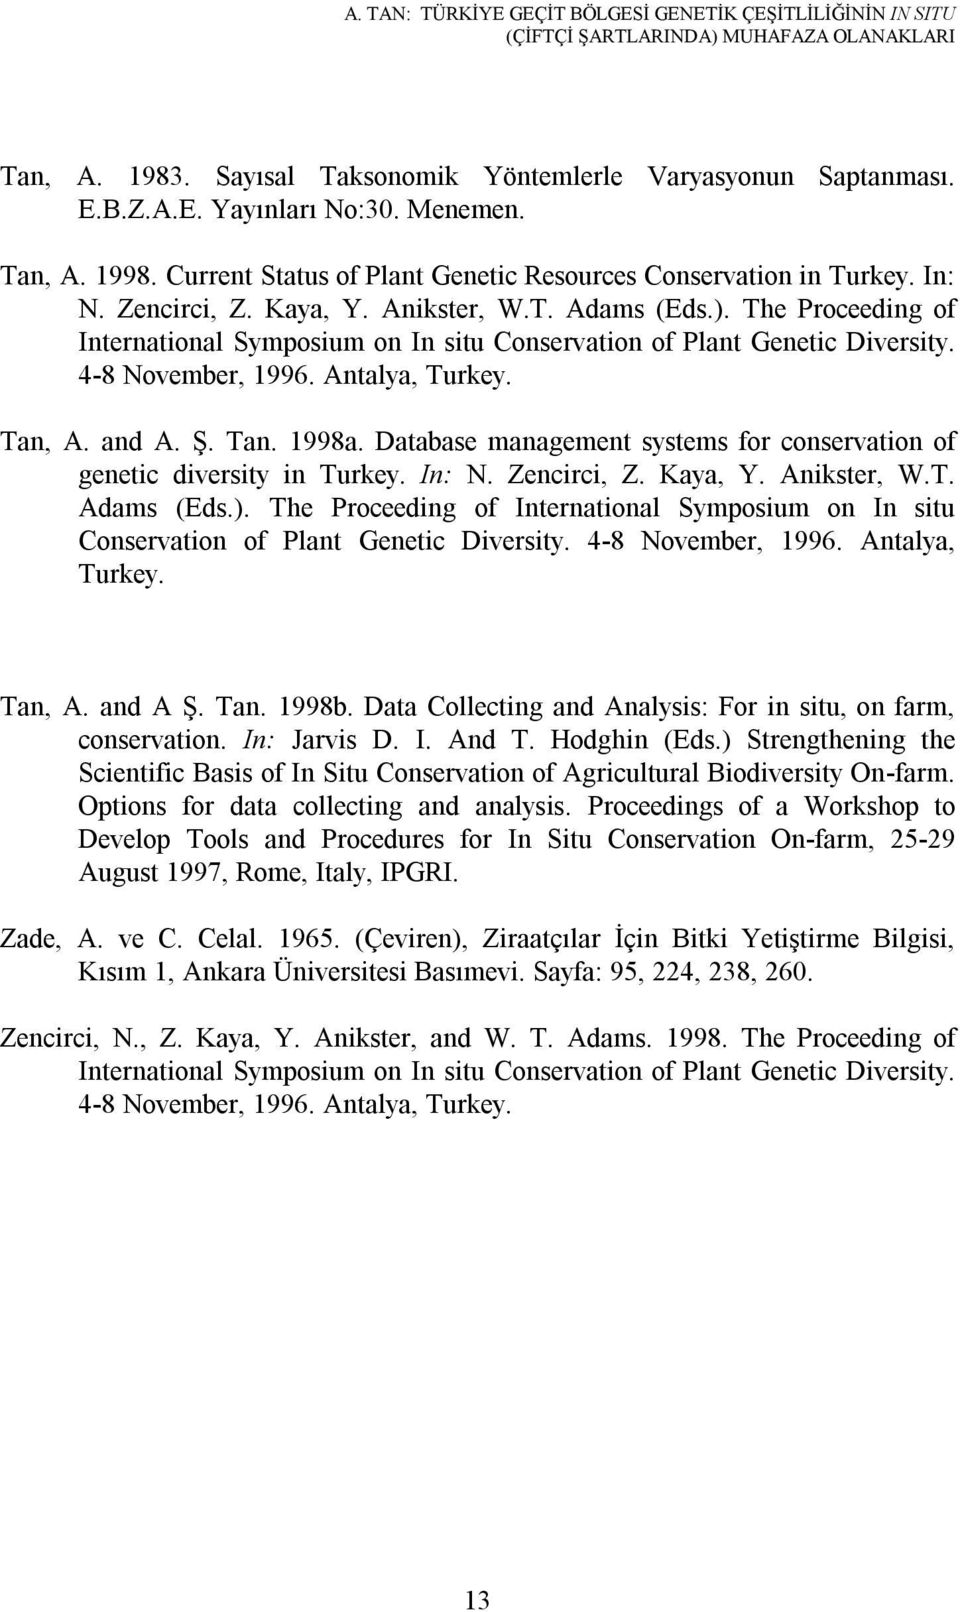 The Proceeding of International Symposium on In situ Conservation of Plant Genetic Diversity. 4-8 November, 1996. Antalya, Turkey. Tan, A. and A. Ş. Tan. 1998a.